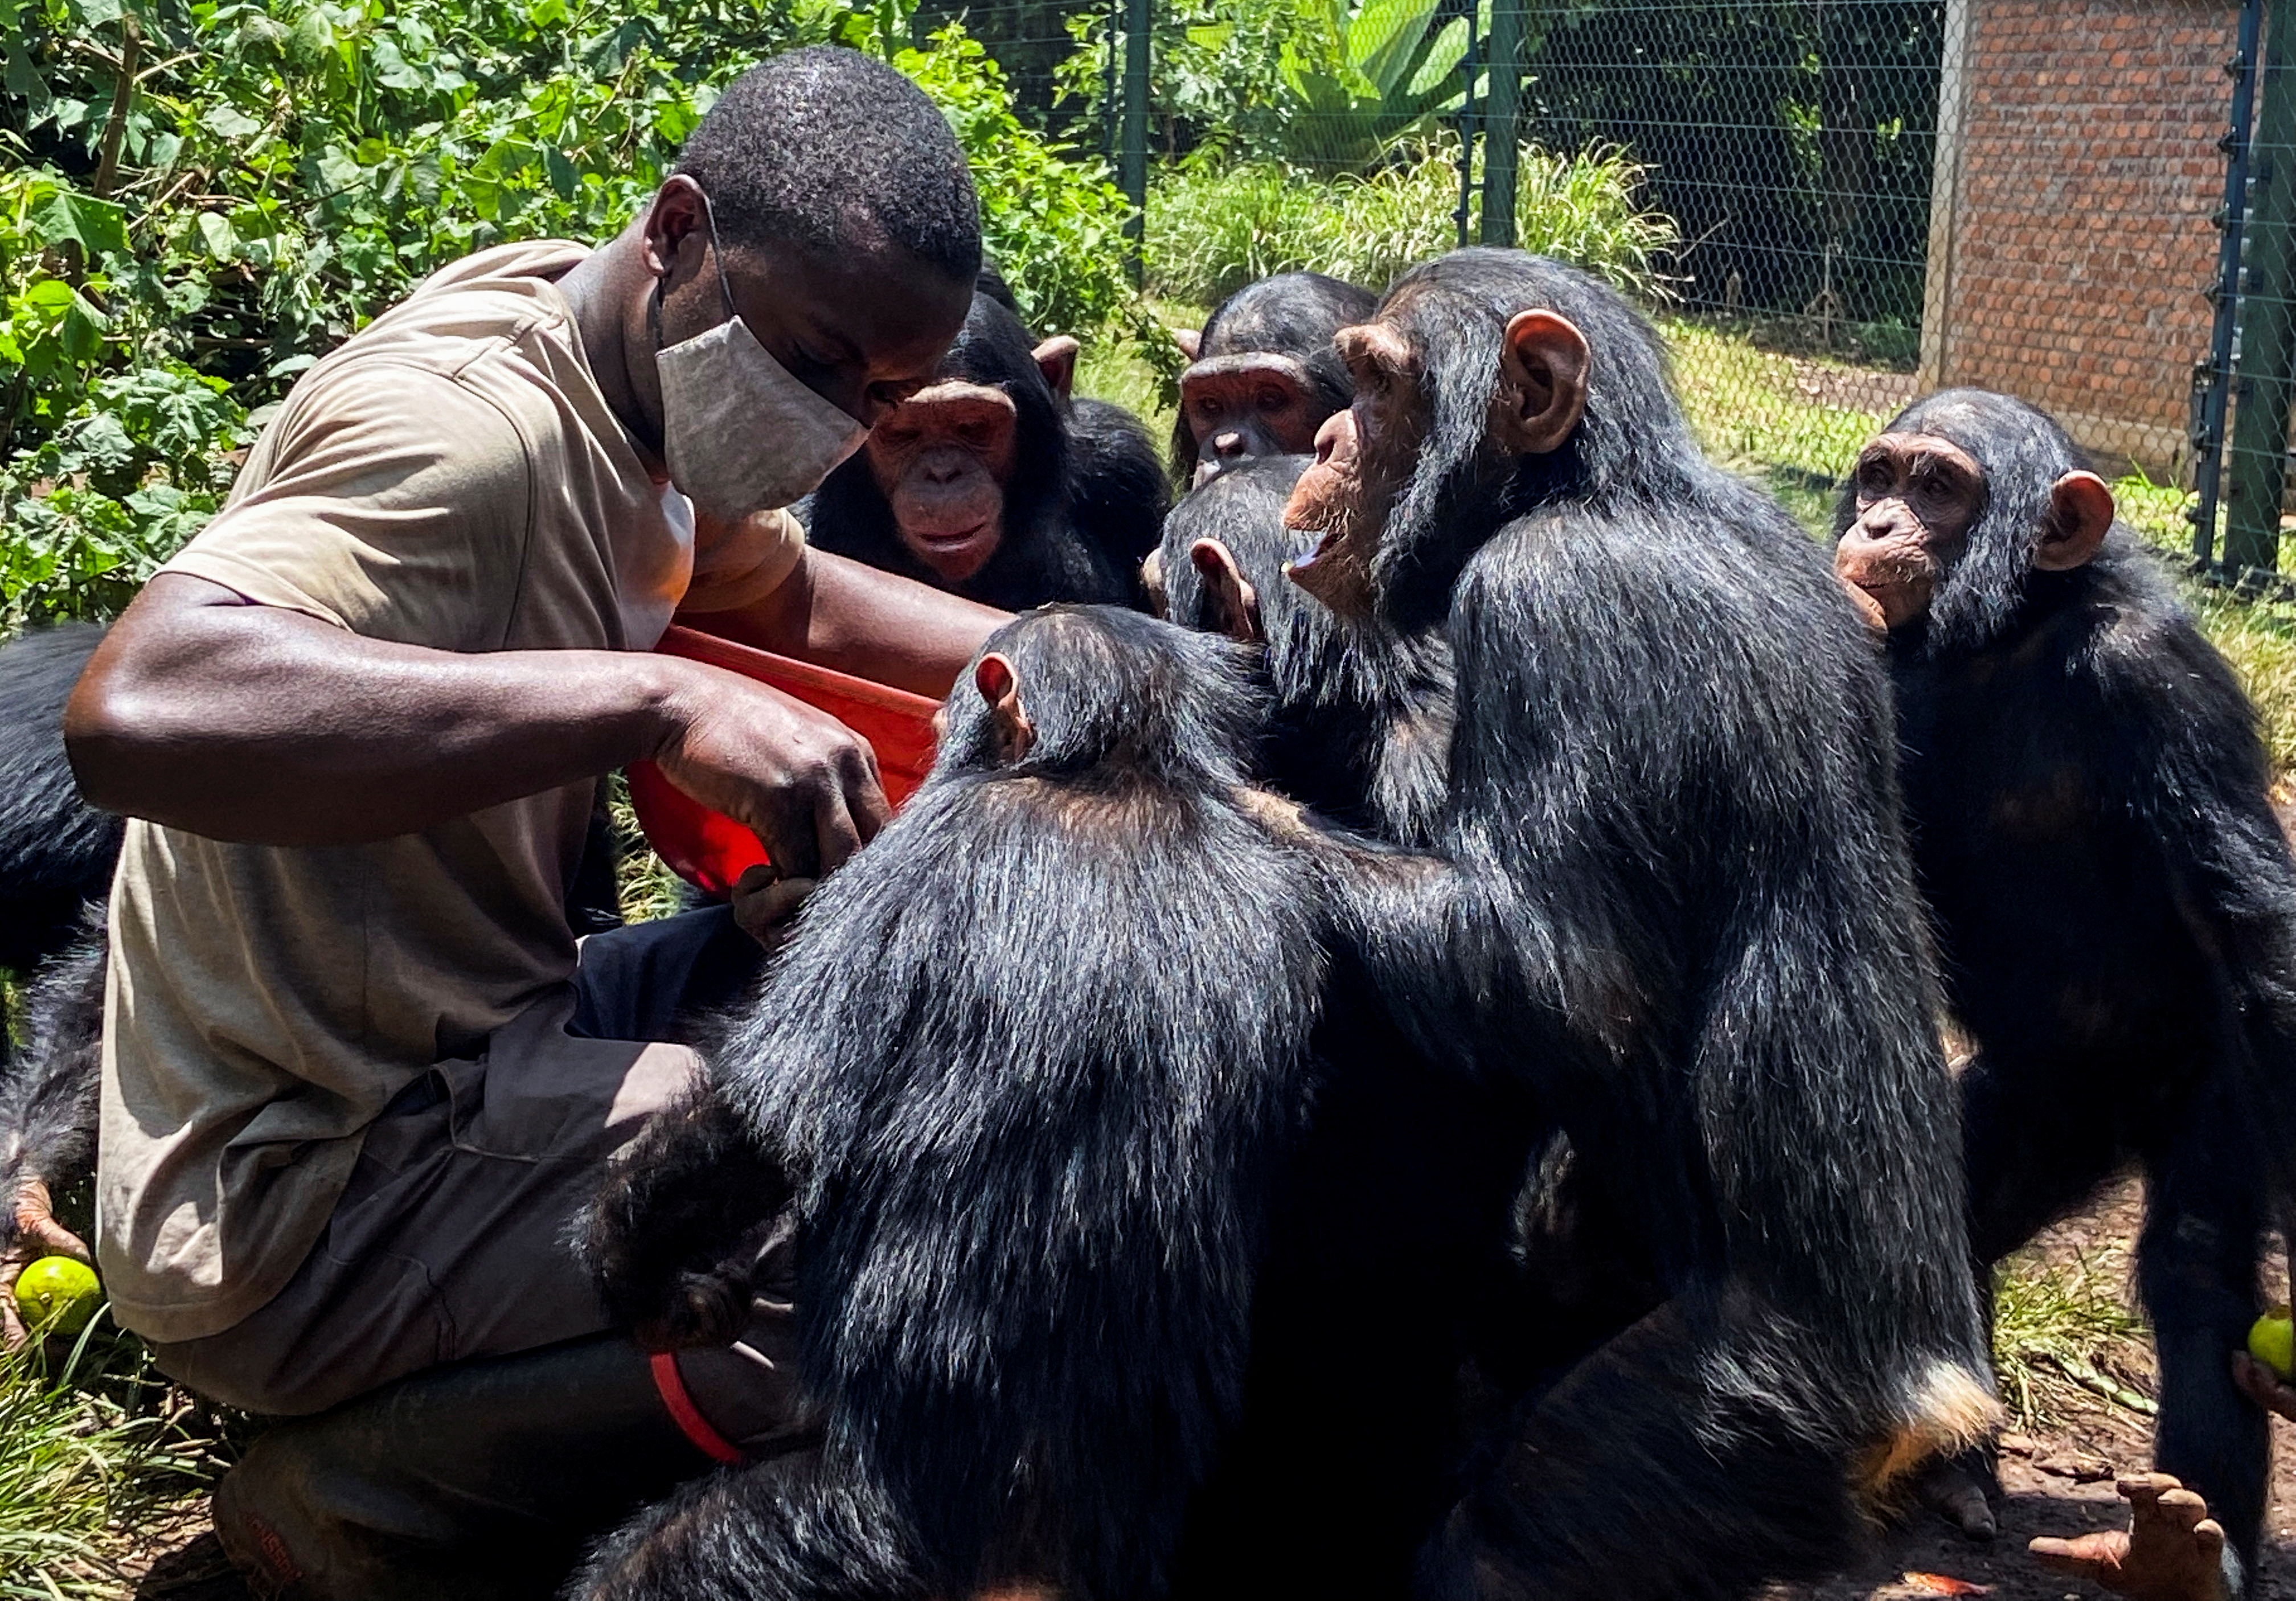 Congo wildlife centre gives orphaned chimps a sanctuary | Reuters